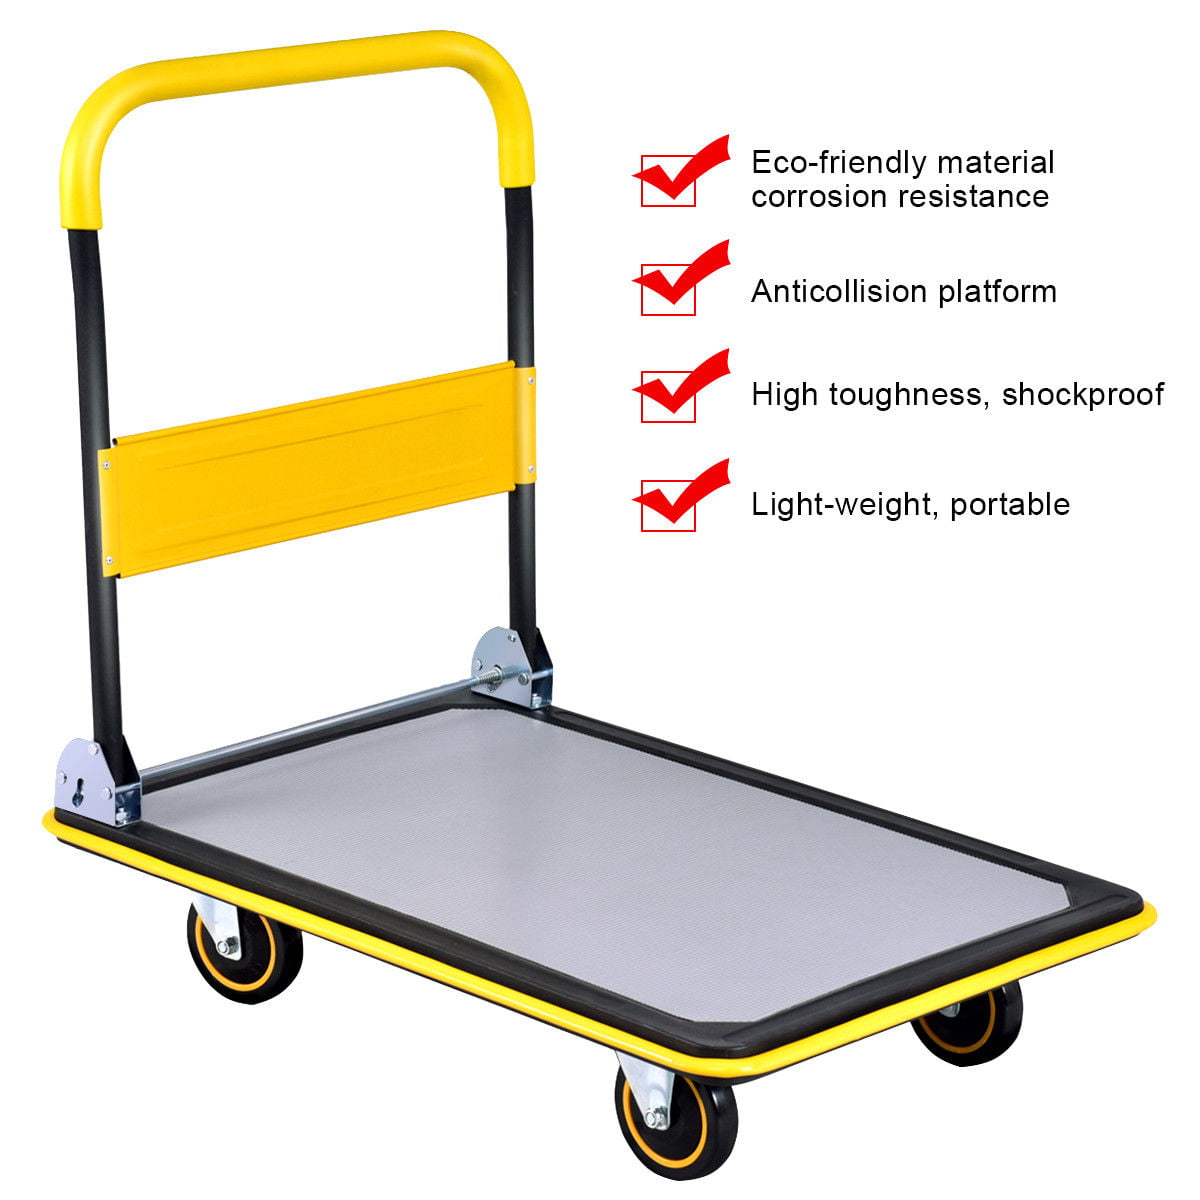 Collapsible Push Truck,Suitable for Luggage Travel Moving and Office Use Will 660 Lb Rolling Storage Dolly,Folding Platform Hand Cart,Black Color 87×57×90 cm 